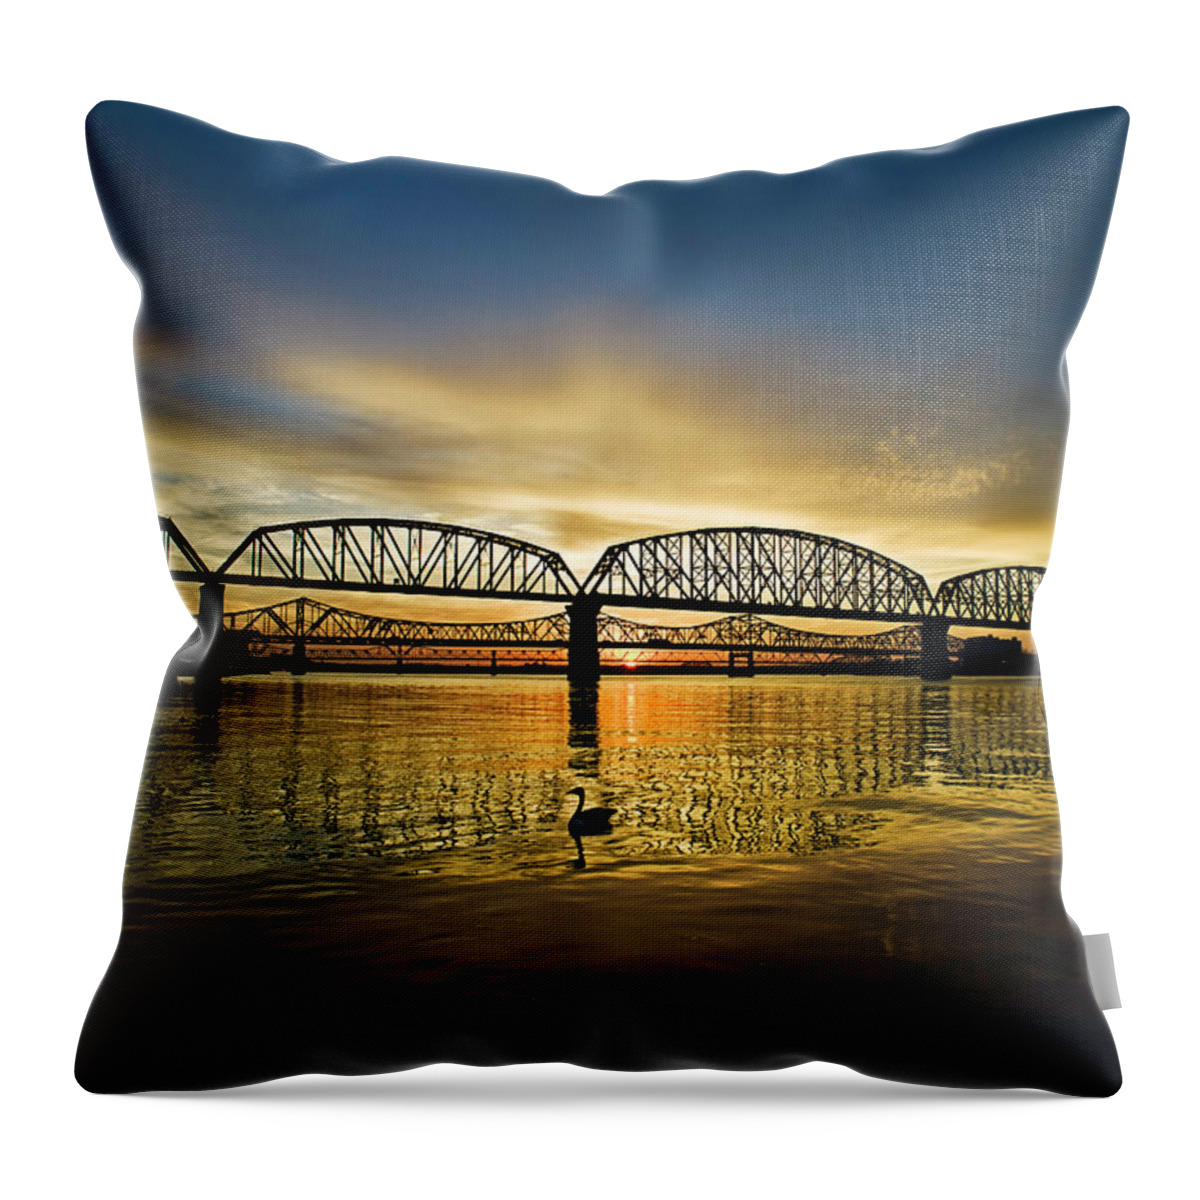 Tranquility Throw Pillow featuring the photograph Louisville Bridges, Ohio River by Vibro1